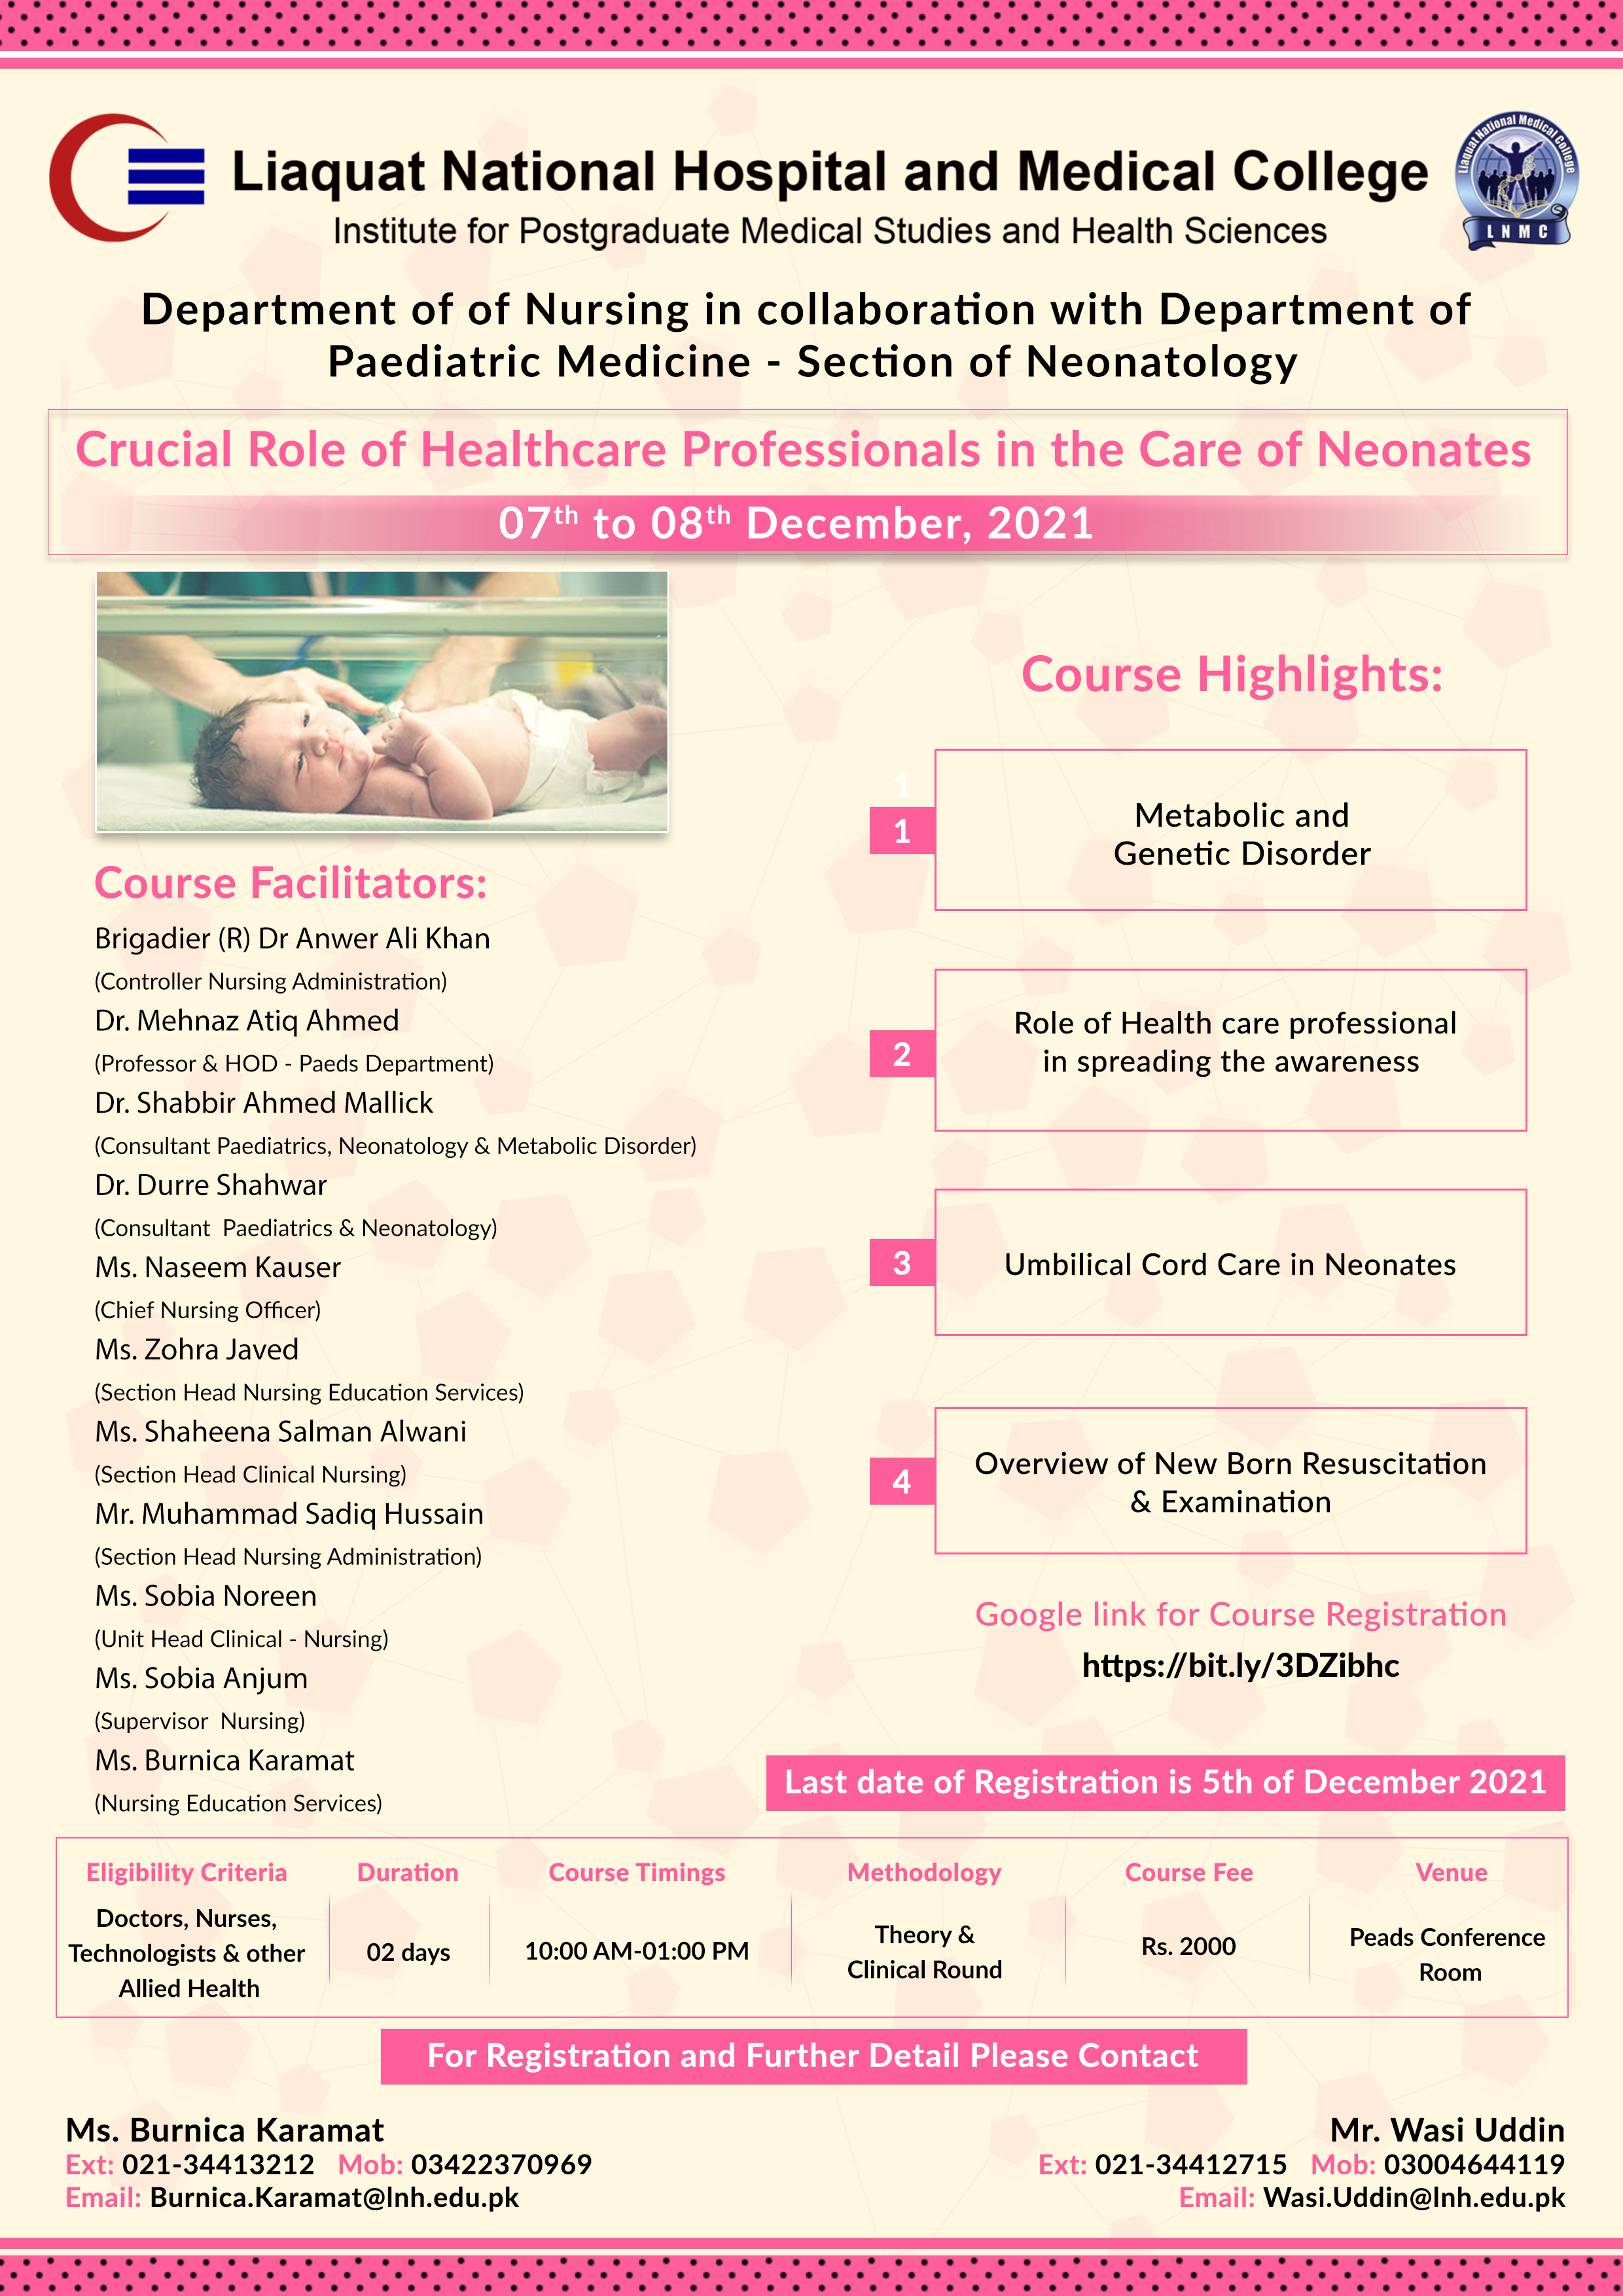 Course on Crucial Role of Healthcare Professionals in the care of Neonates